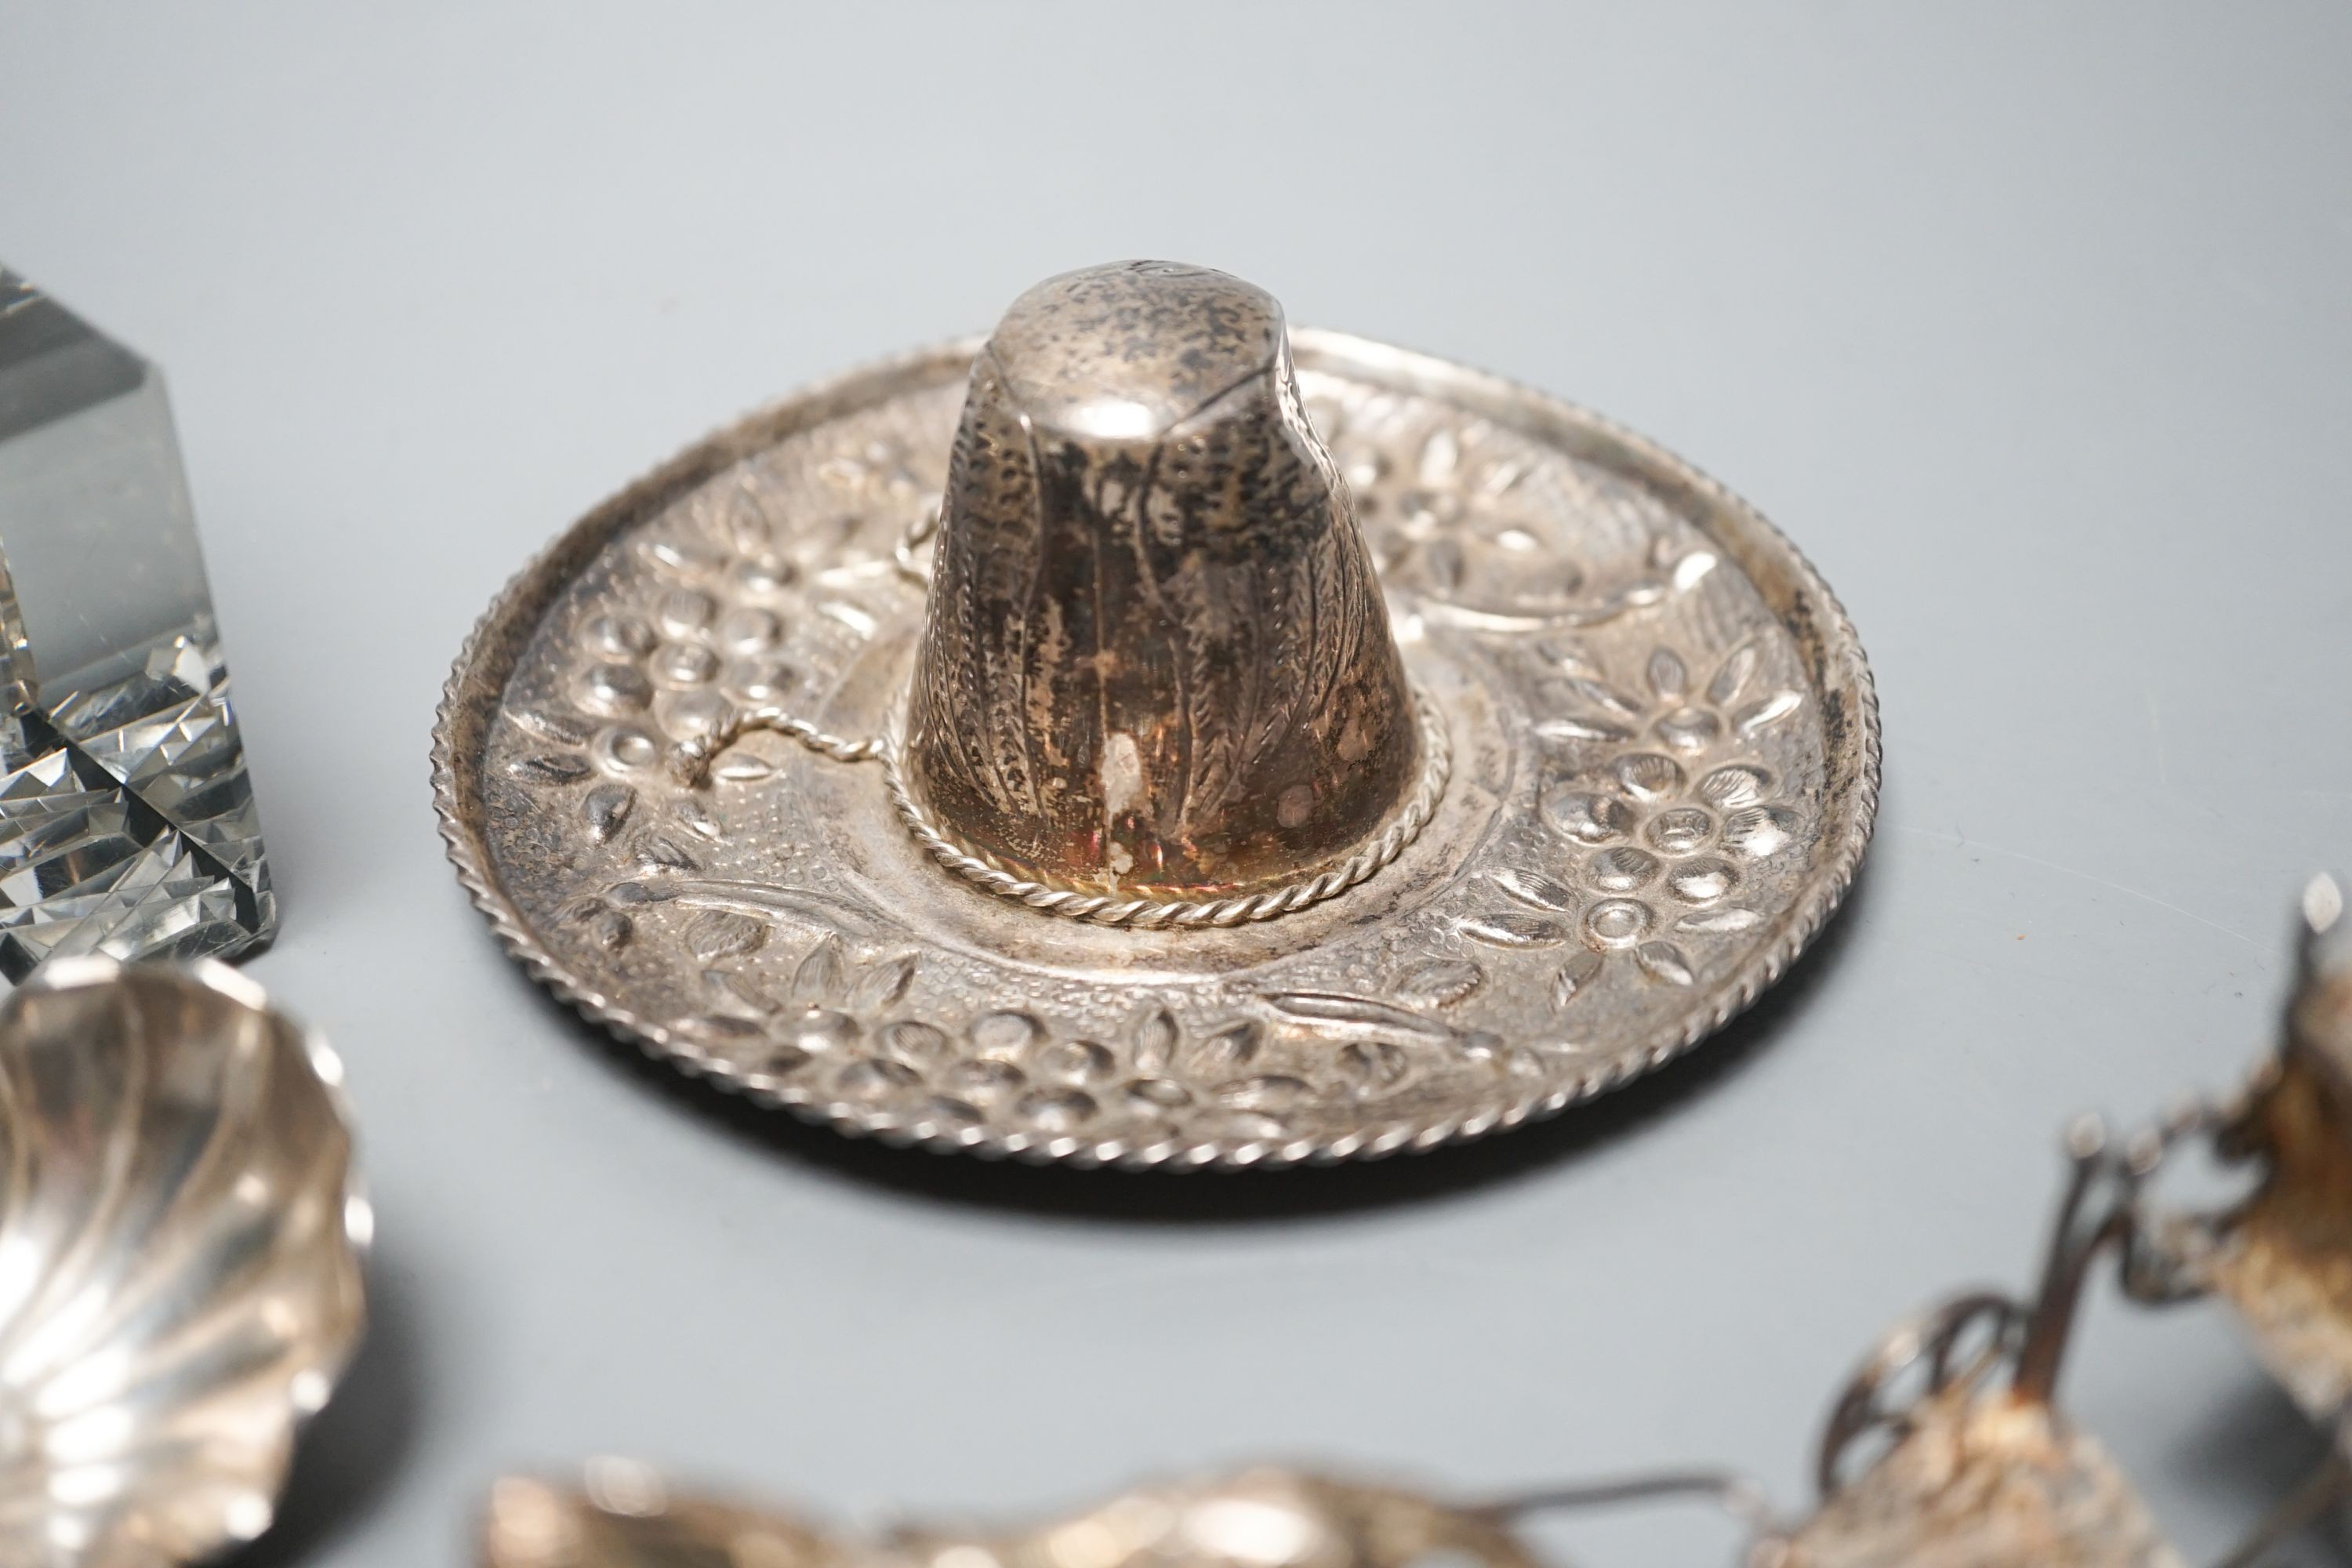 A silver mounted glass inkwell, A Mexican white metal miniature sombrero, a white metal caddy spoon and a filigree horse and carriage.